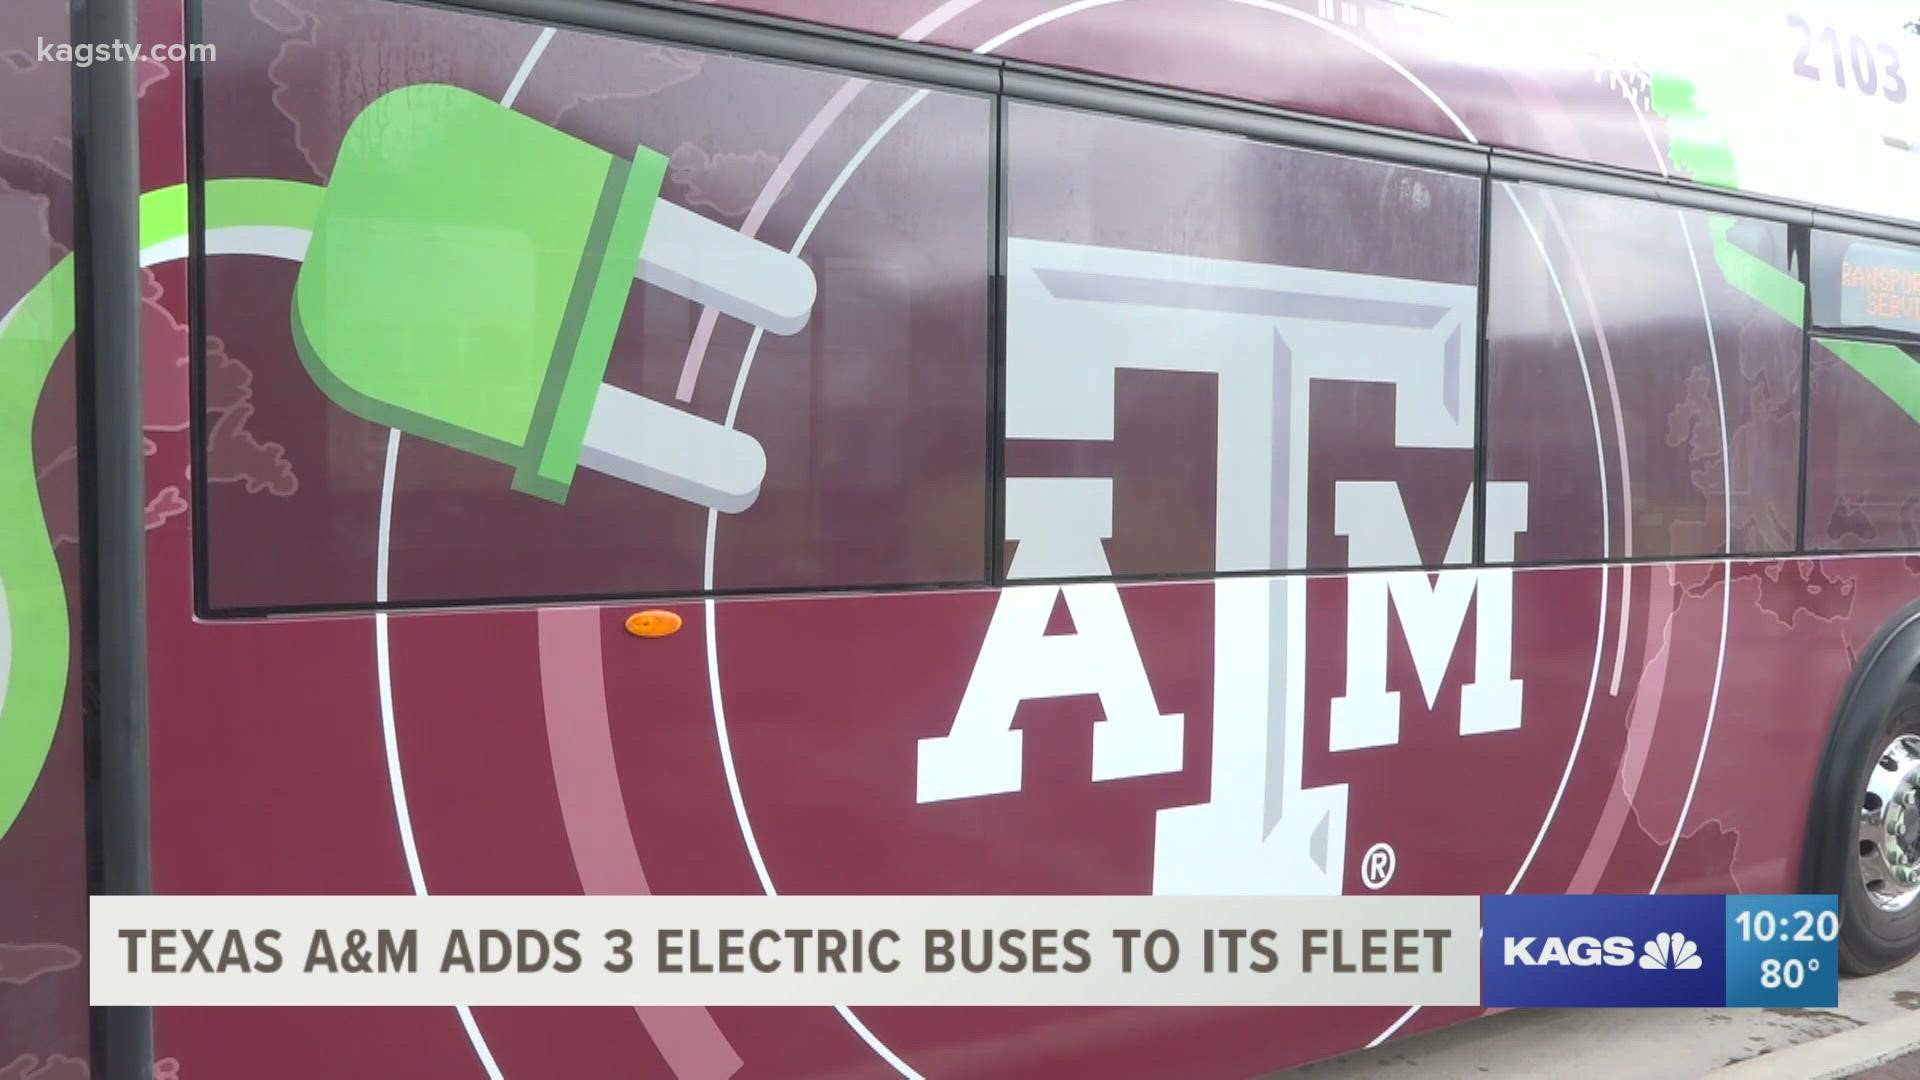 The electric buses are the first in the state. They were funded with the help of a $14 million grant from the Federal Transit Commission.